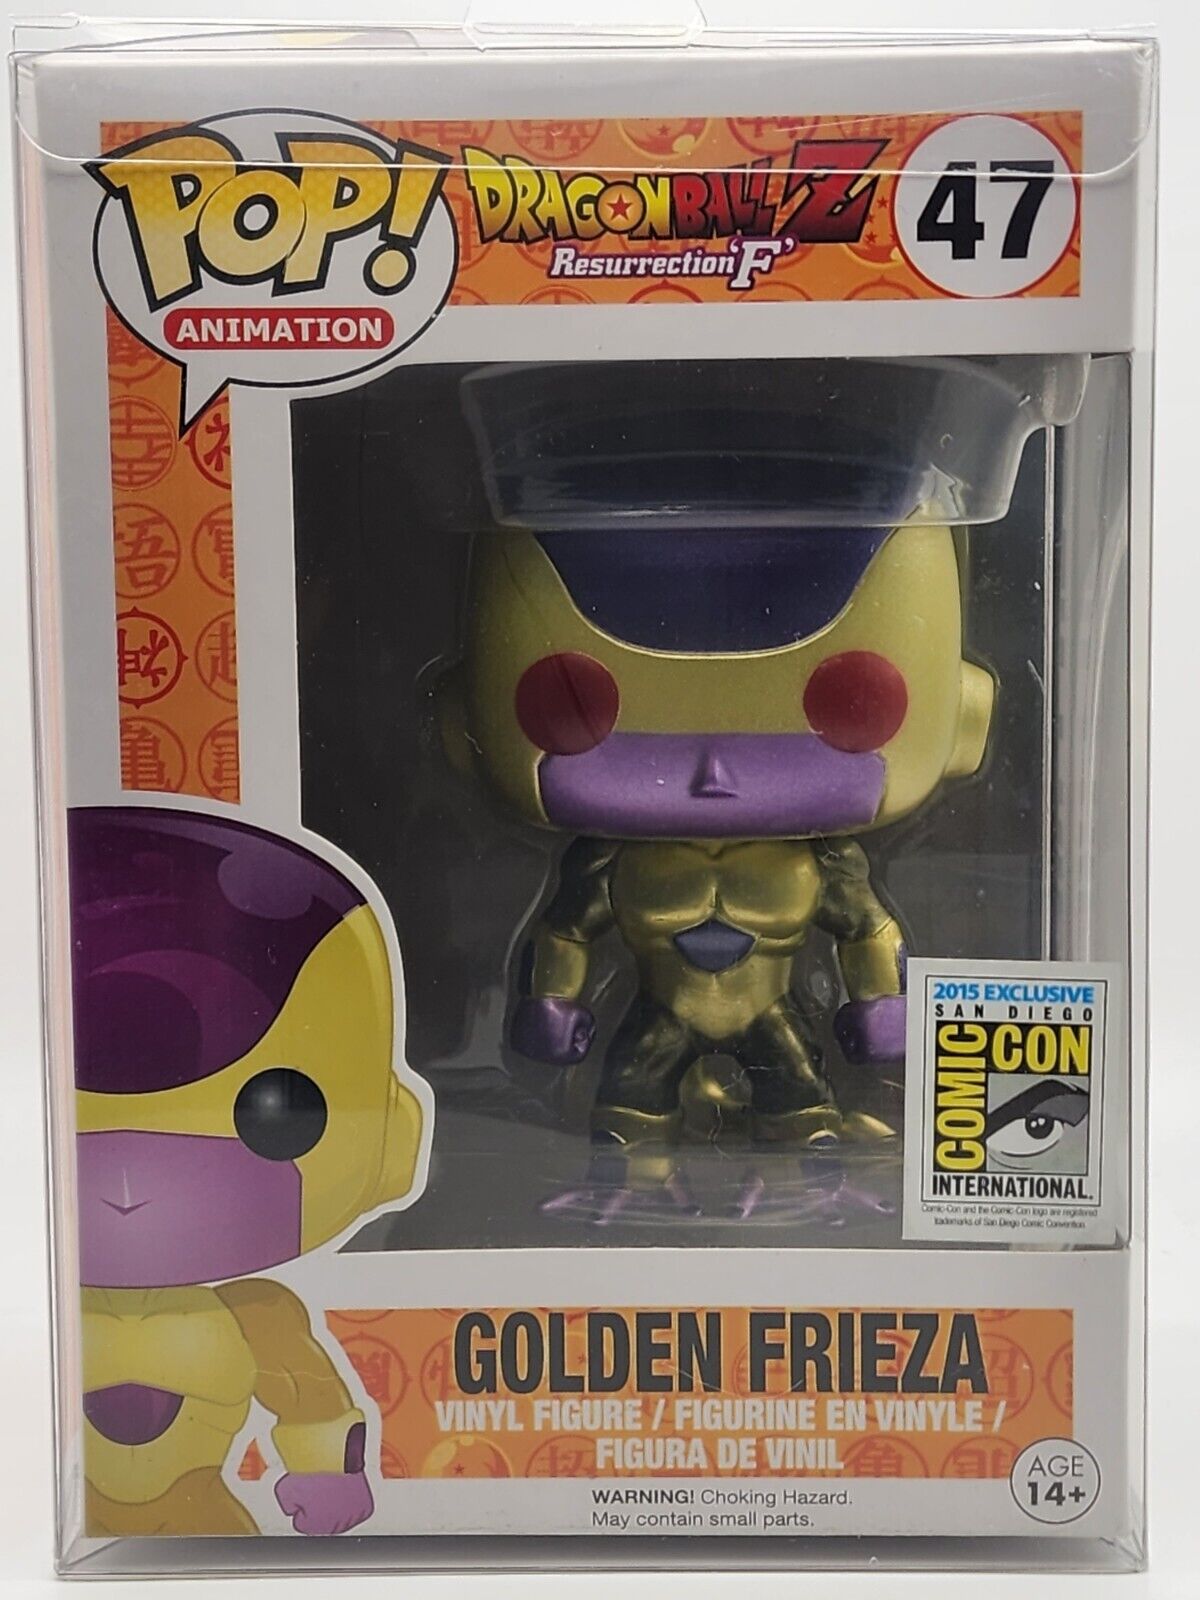 Funko Pop 2015 SDCC Con Exclusive Red Eyes Golden Frieza #47 w/FREE SDCC CARD